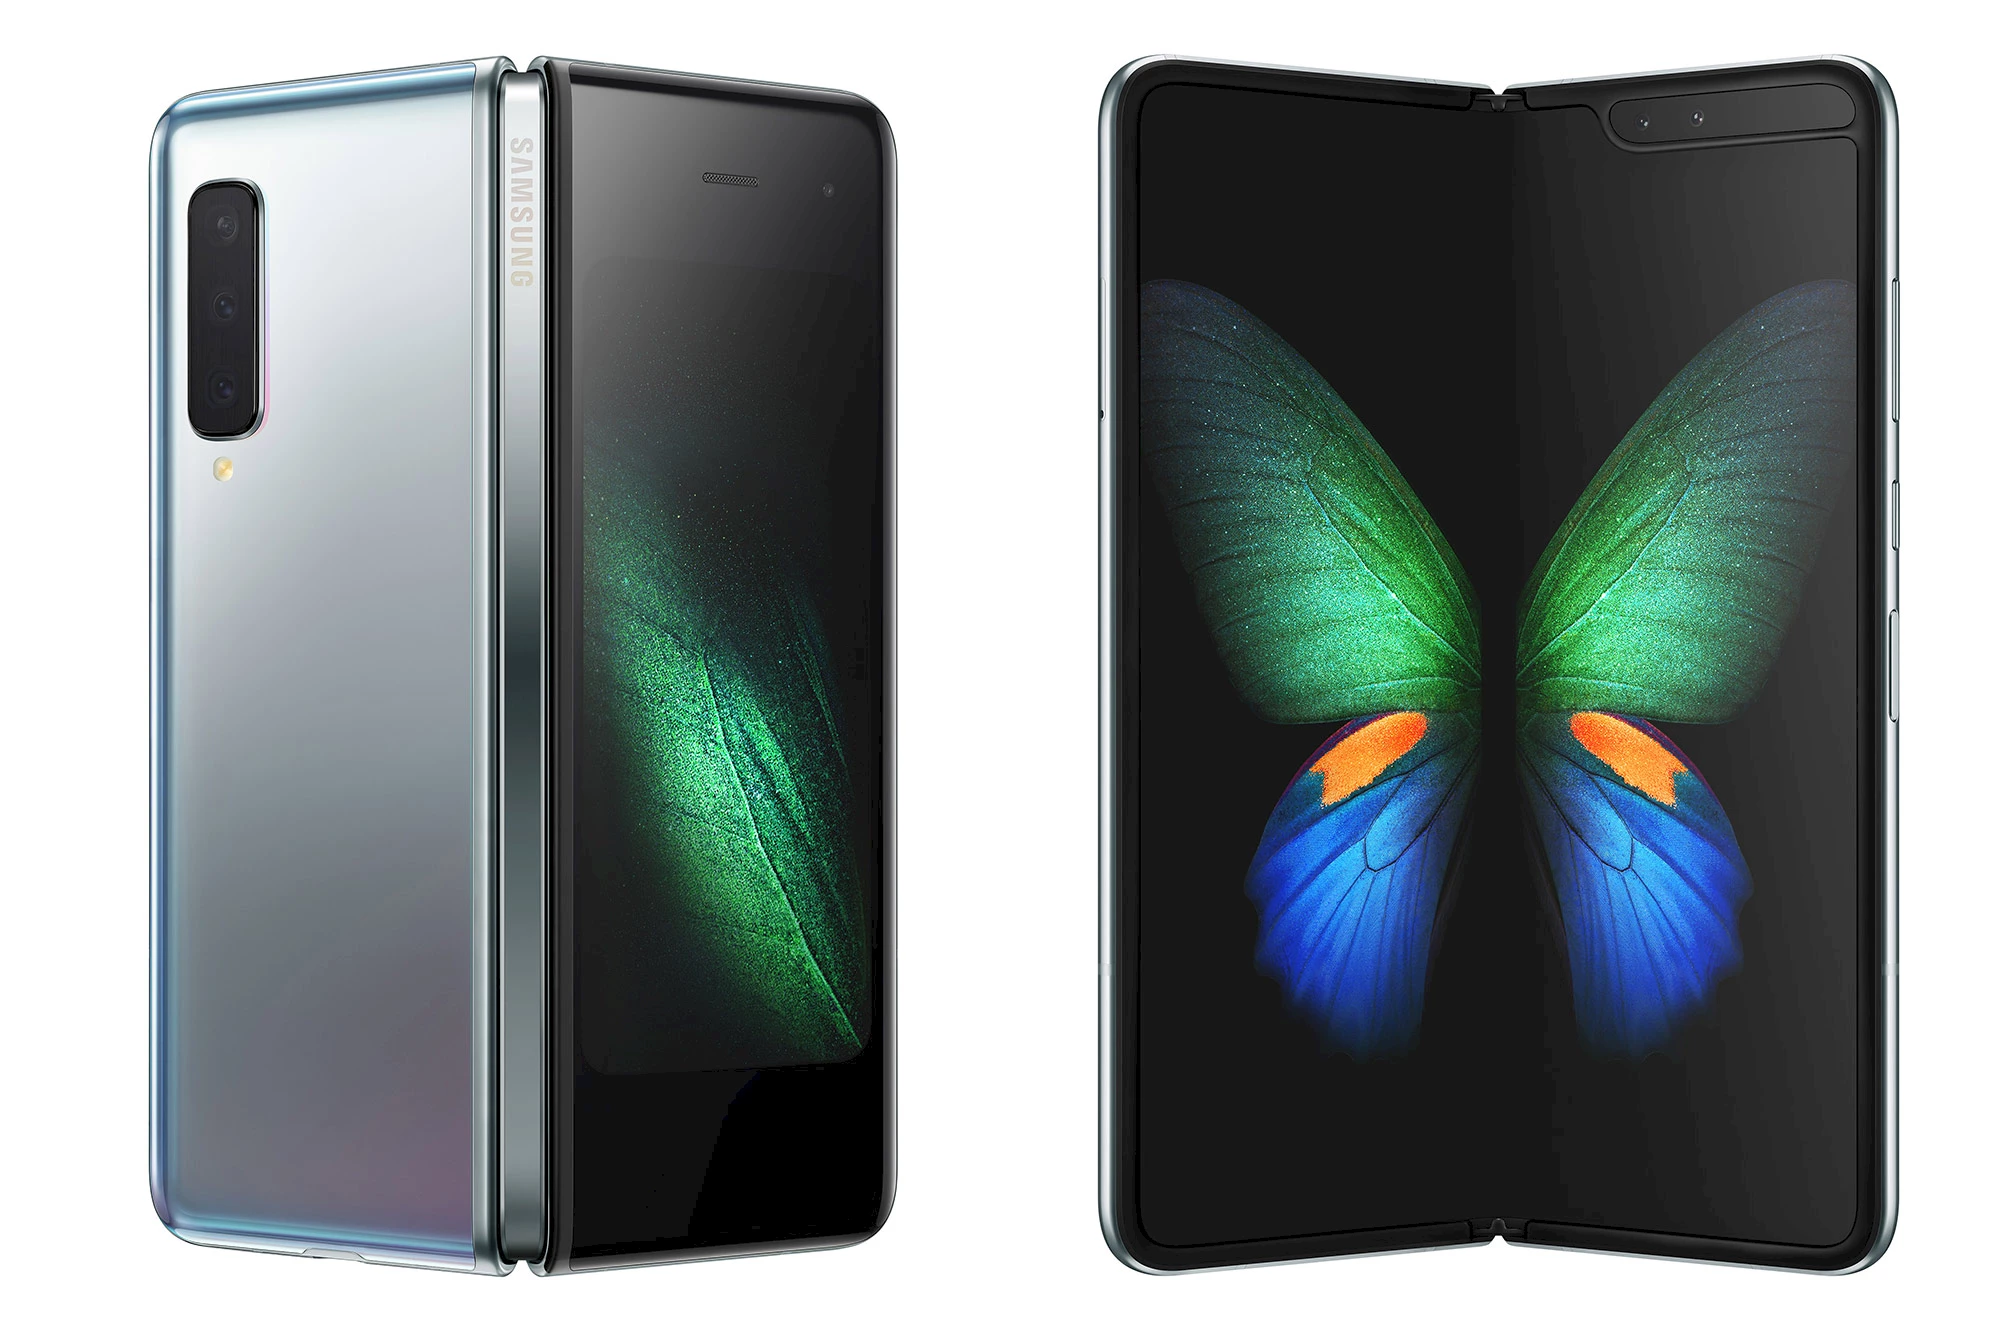 The (new and improved) Galaxy Fold.